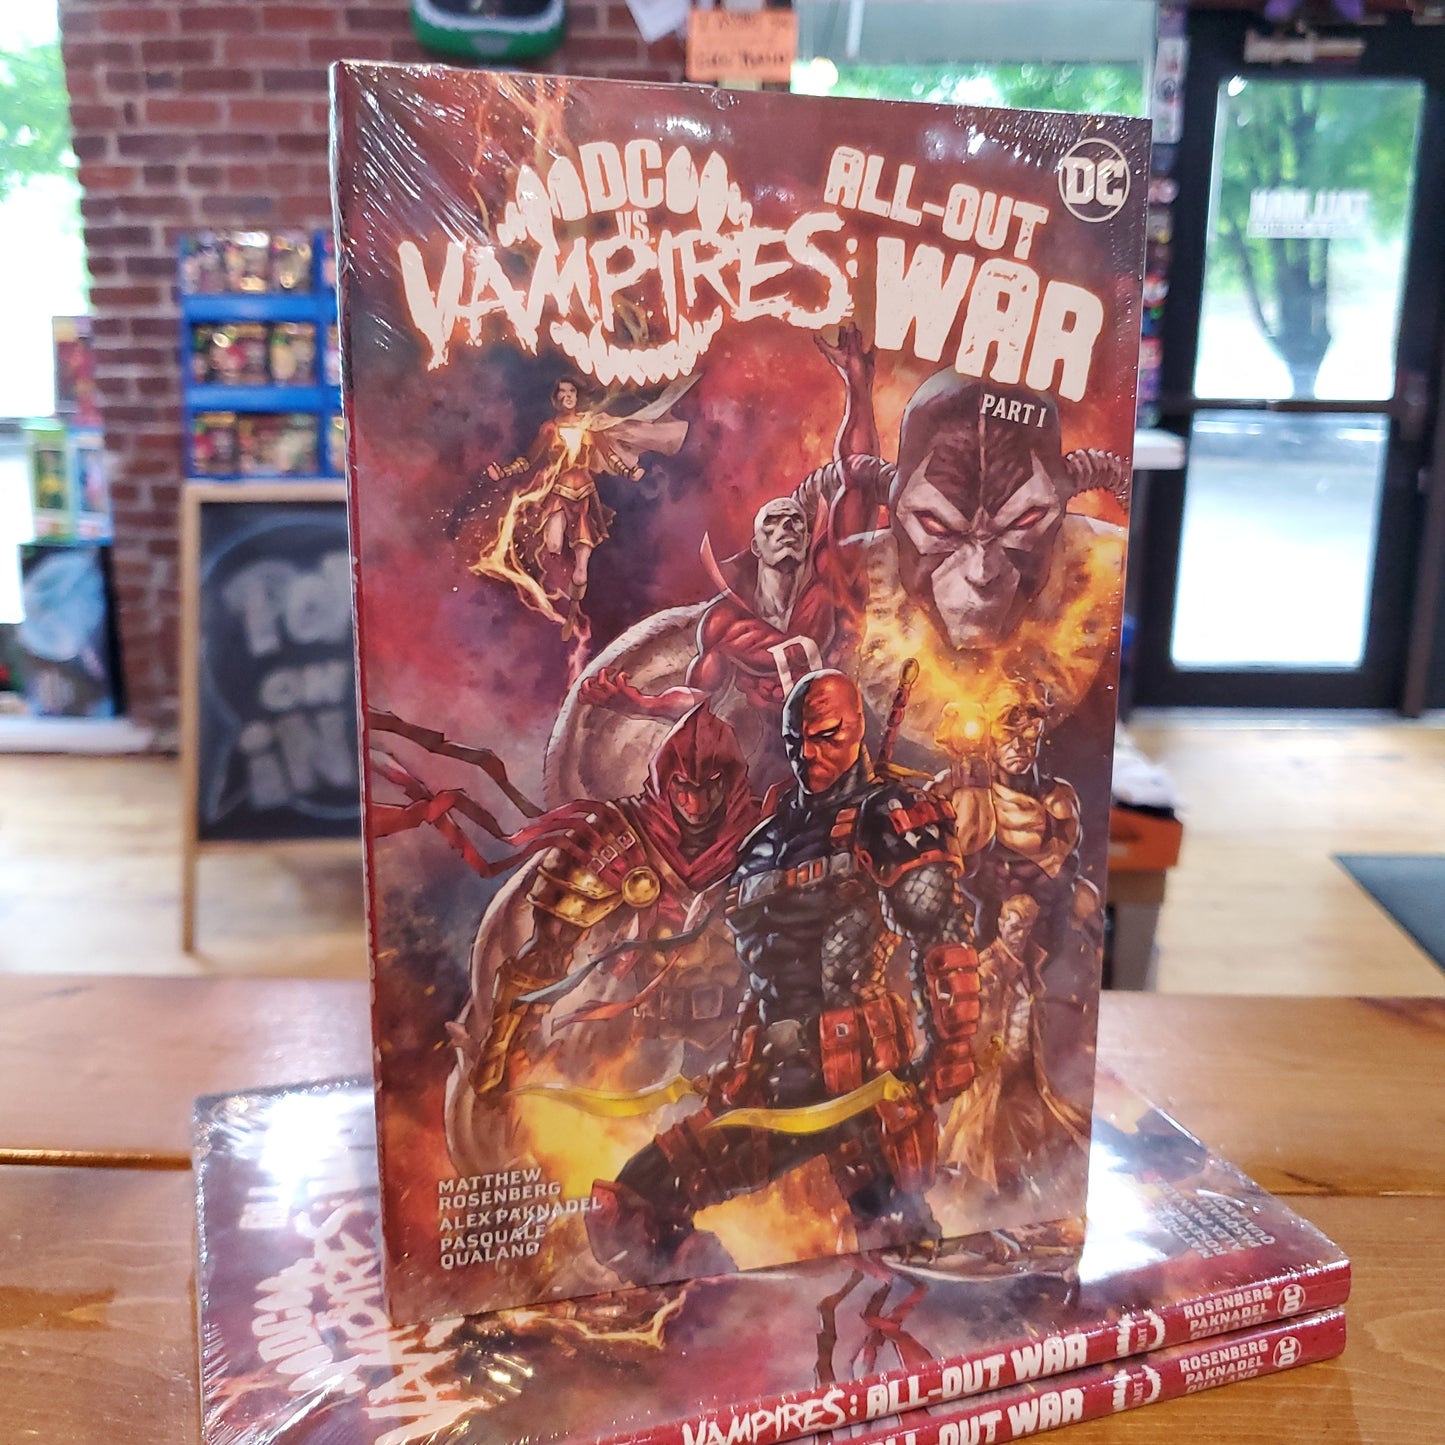 DC vs. Vampires: All-Out War (Part 1) - Hardcover Graphic Novel by DC Comics